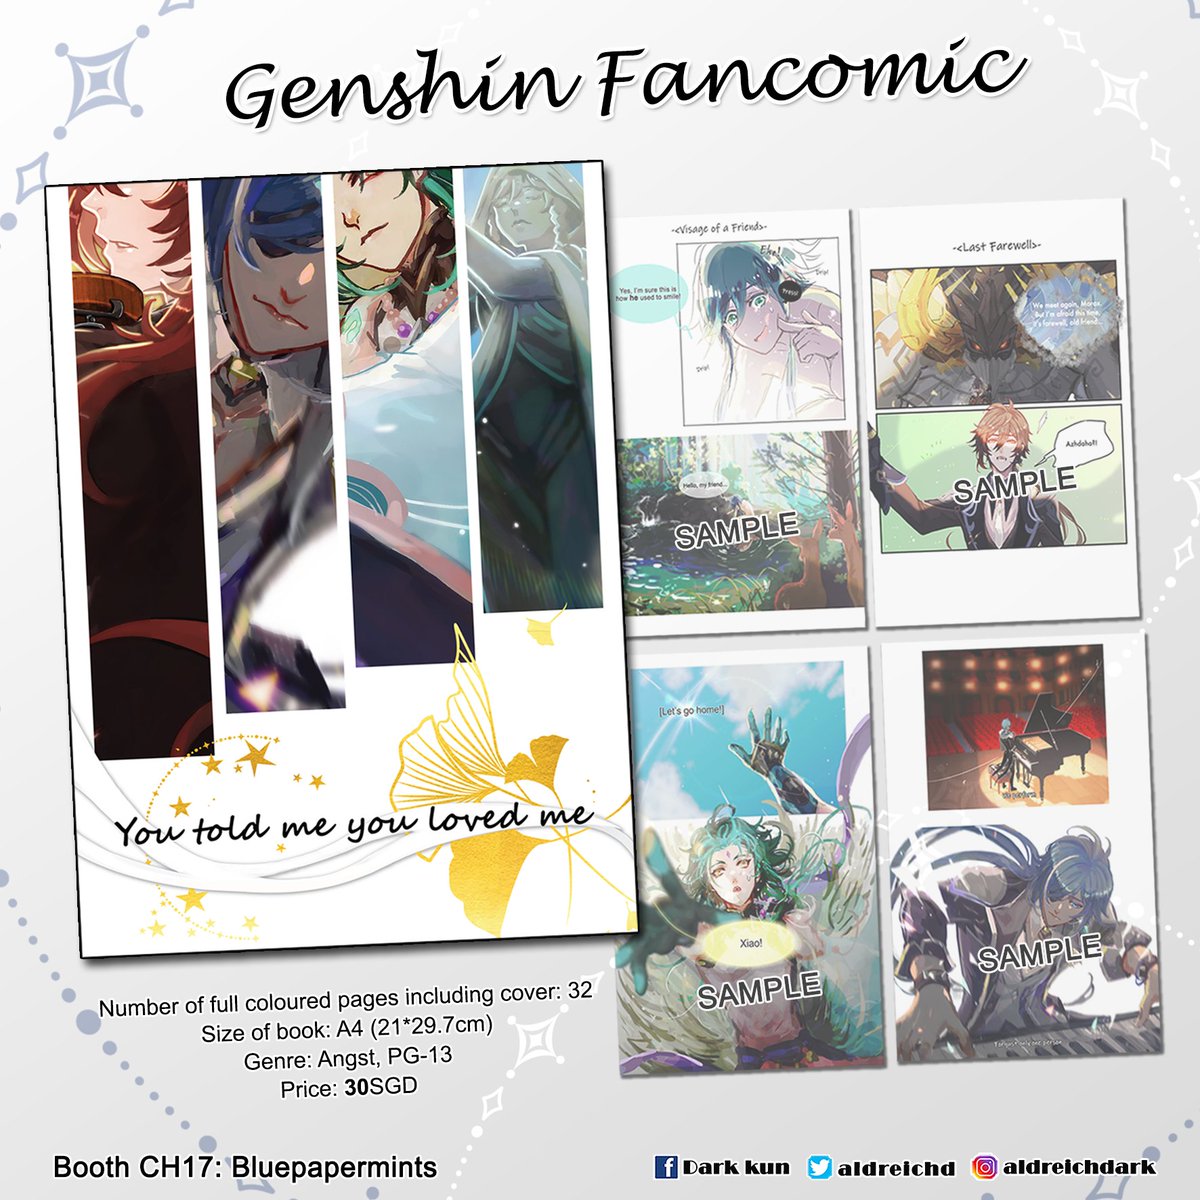 AFASG catalogue part 4

I will bringing 30 of the Genshin fancomics over!
Yes, they will be available during Comic Fiesta as well.

Zhongli standee is AFA exclusive, as got space to display it w/o causing trouble to my booth neighbours w.

#AFASG2022 #AFASG #GENSHIN #Genshinlmpac 